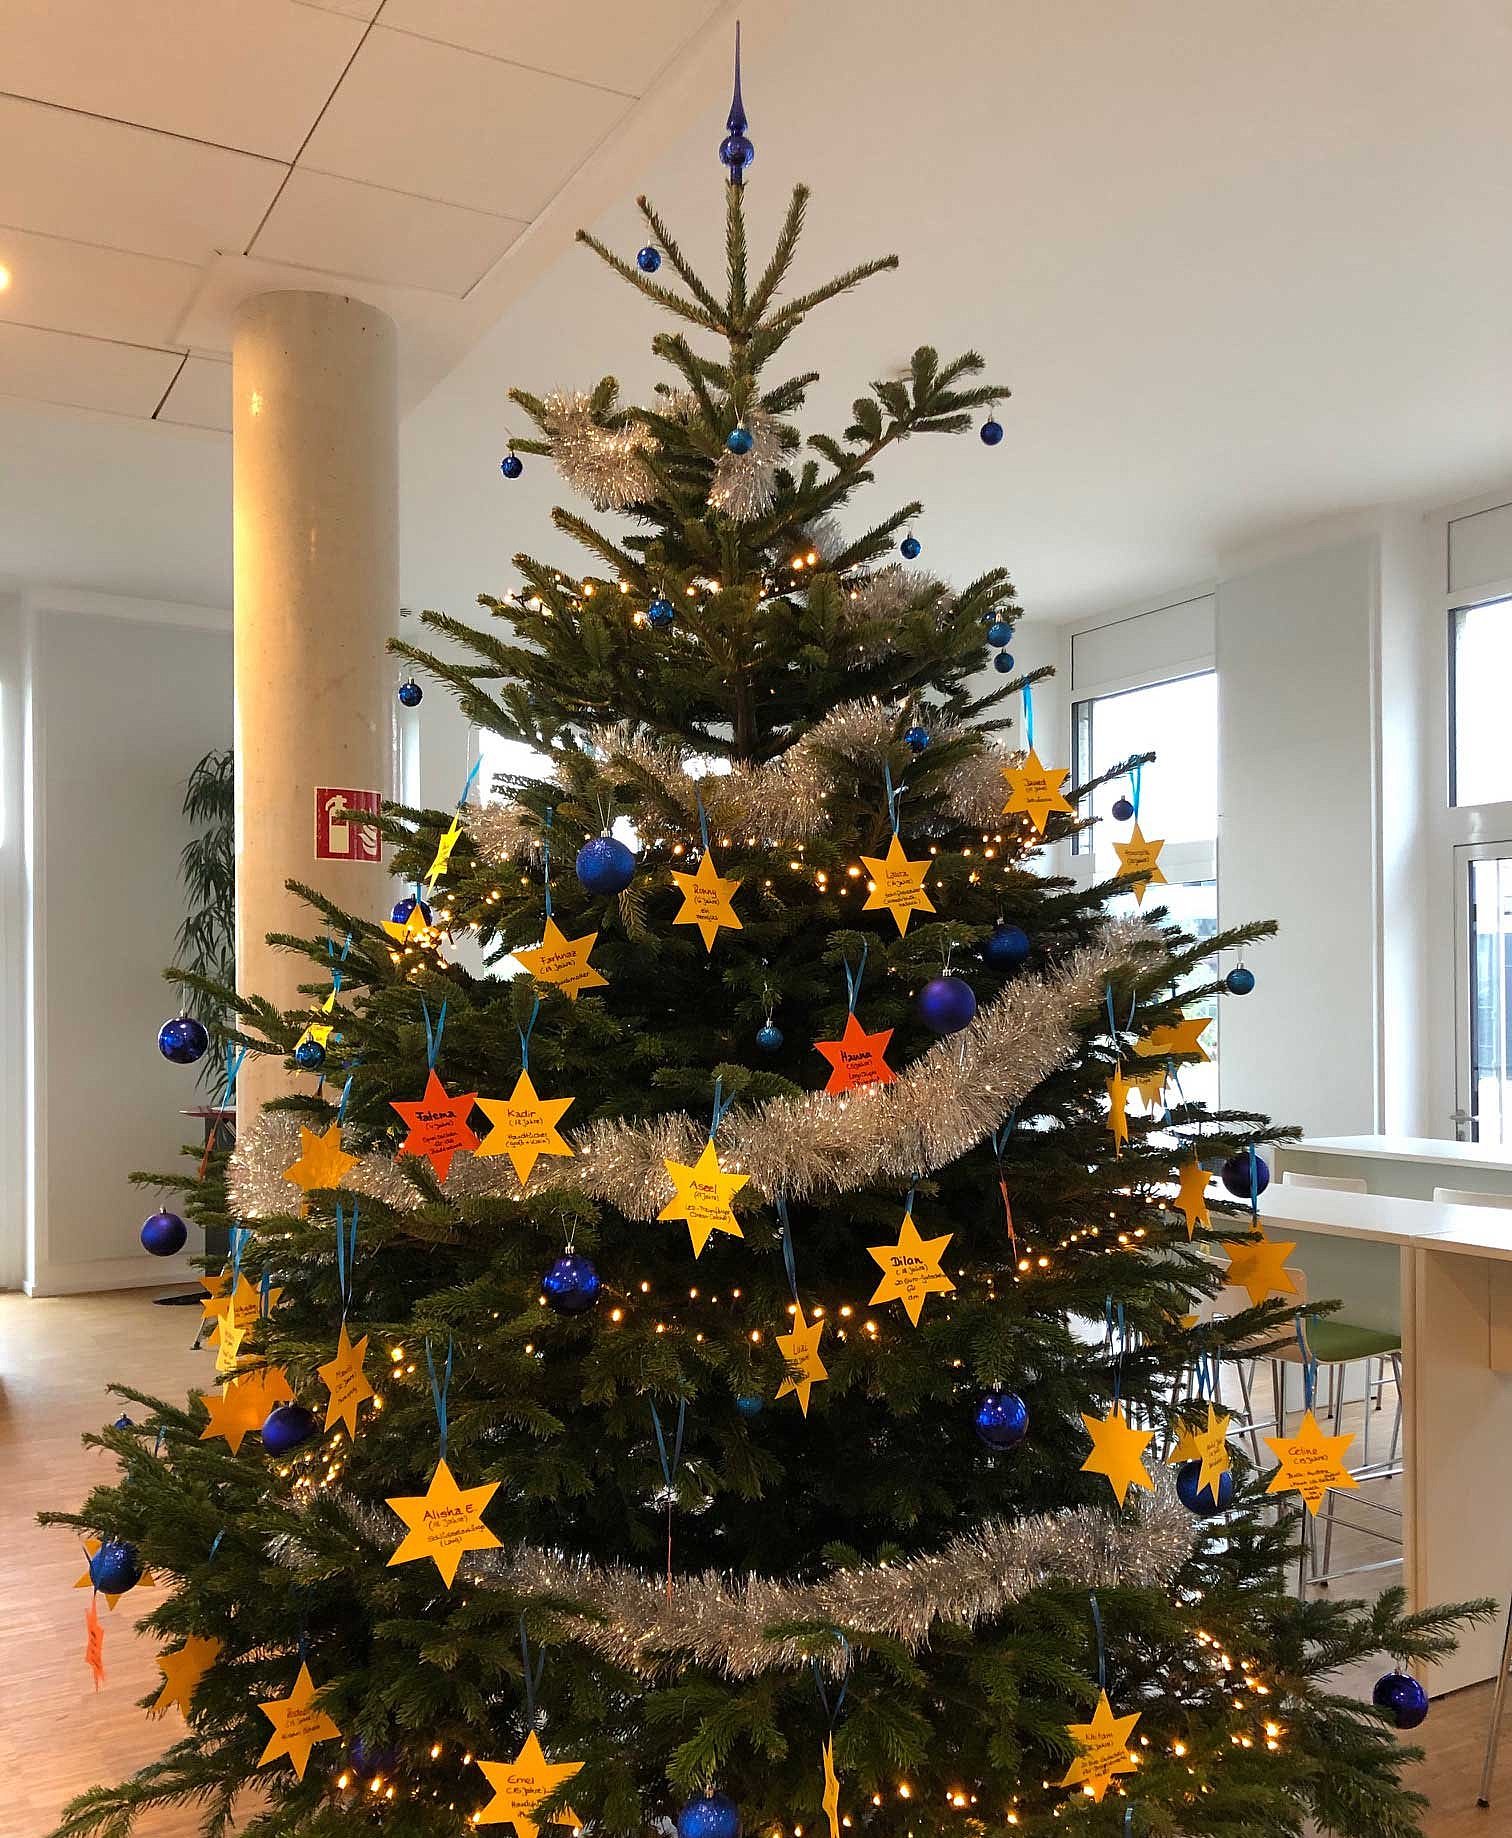 Christmas tree with gift wishes from the Luise-Scheppler-Heim